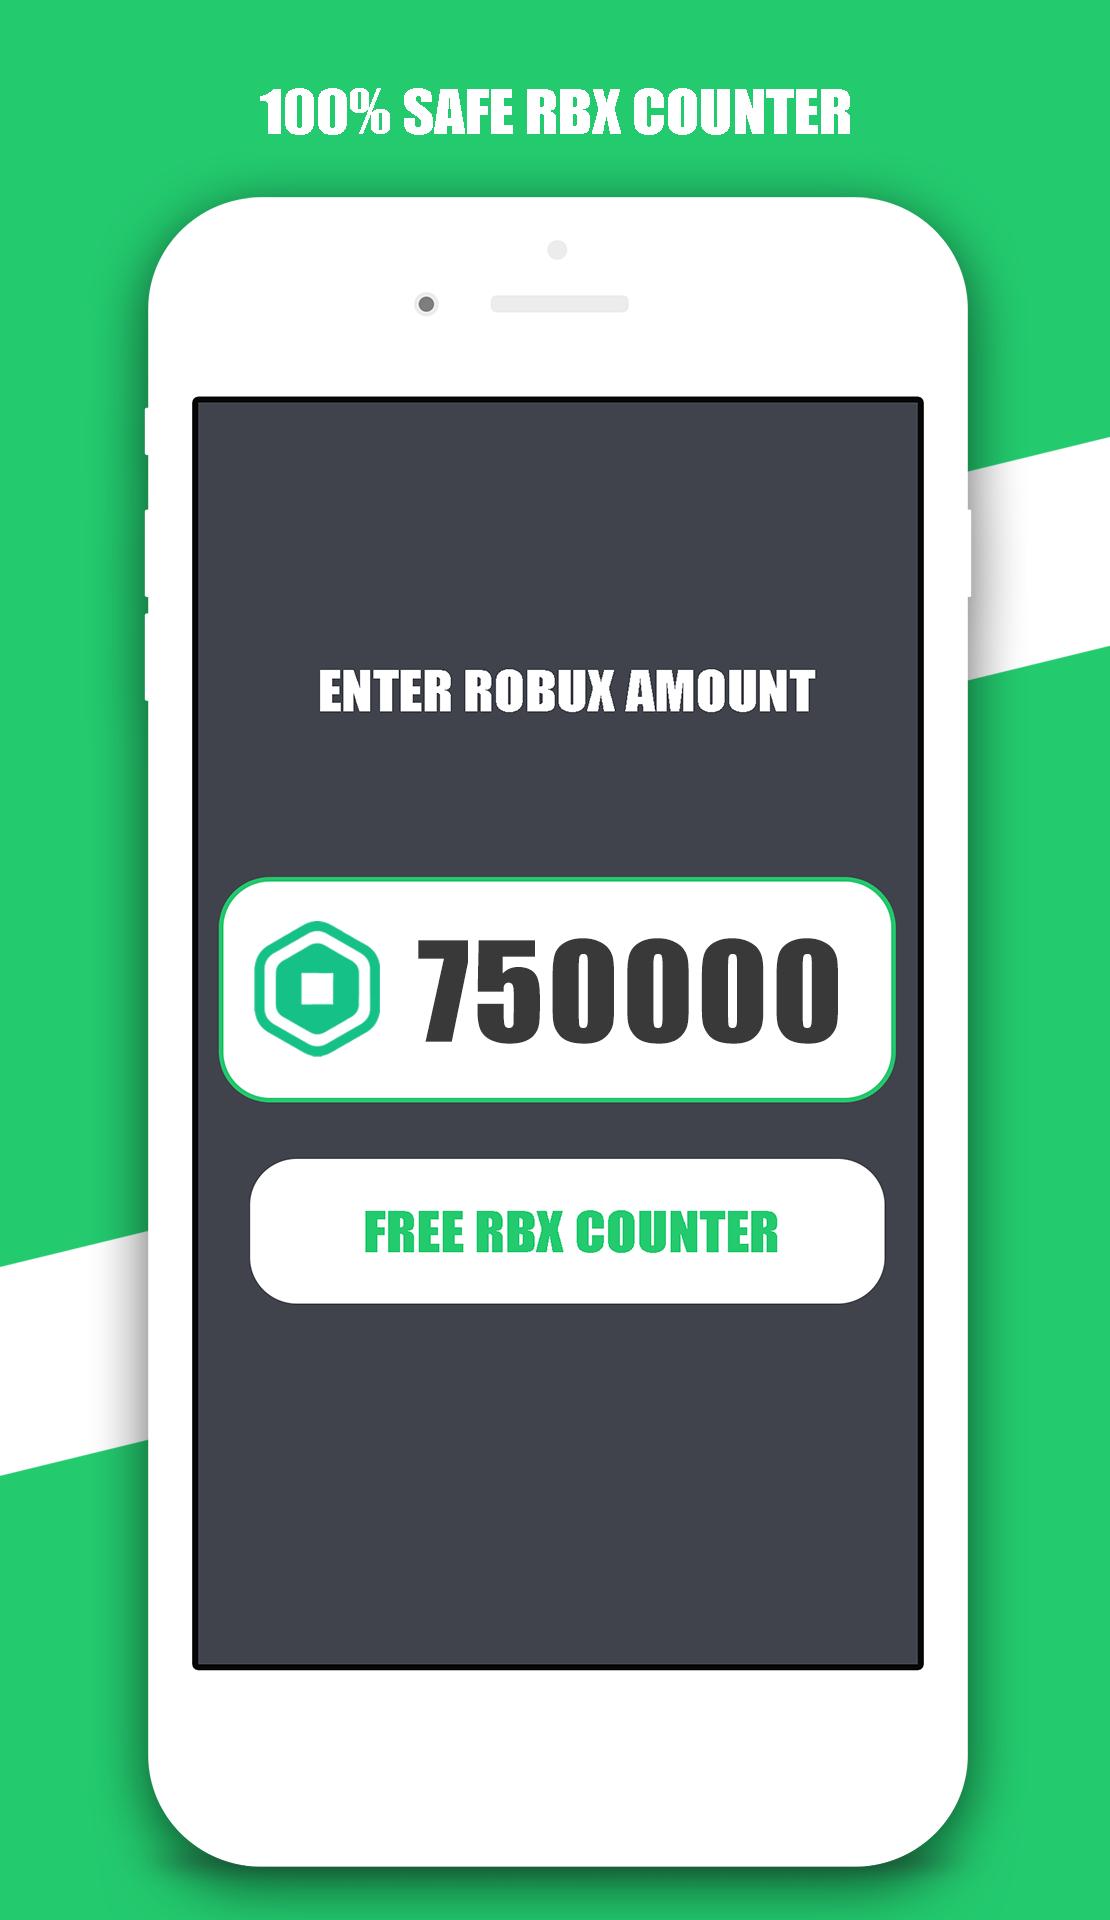 Free Robux Counter For Android Apk Download - ดาวน โหลด free robux counter for roblox rbx masters apk6 ร น